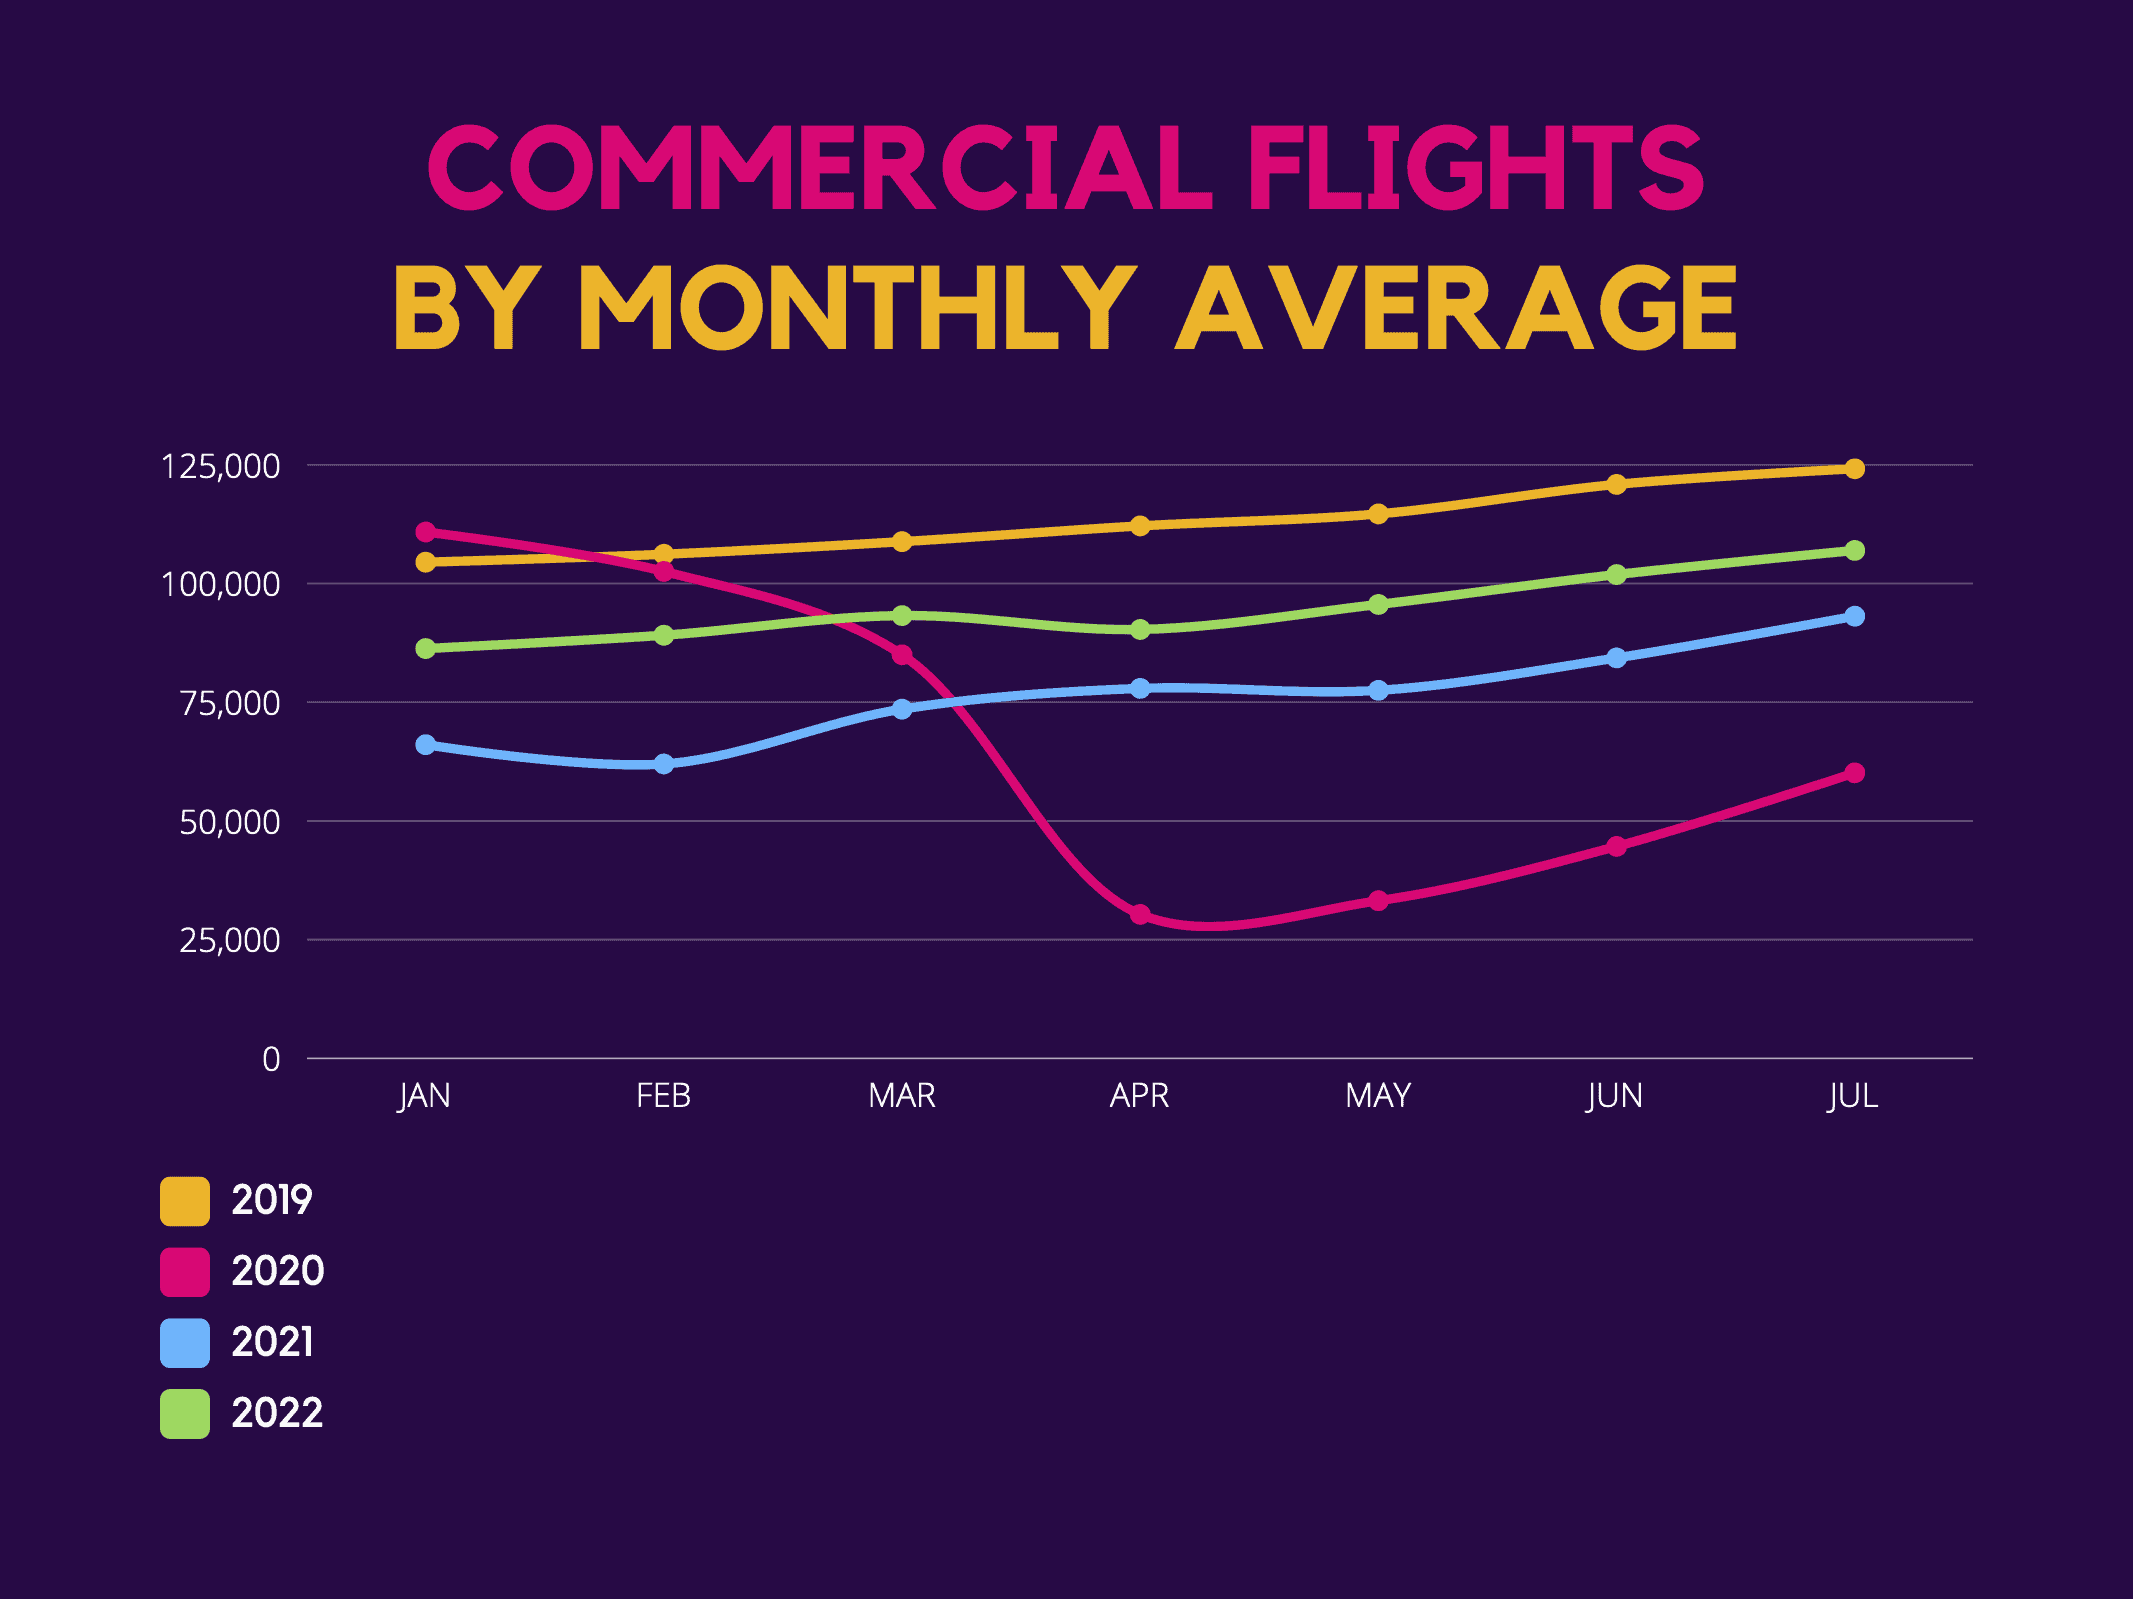 Rolls-Royce: Commercial Flights by Monthly Average